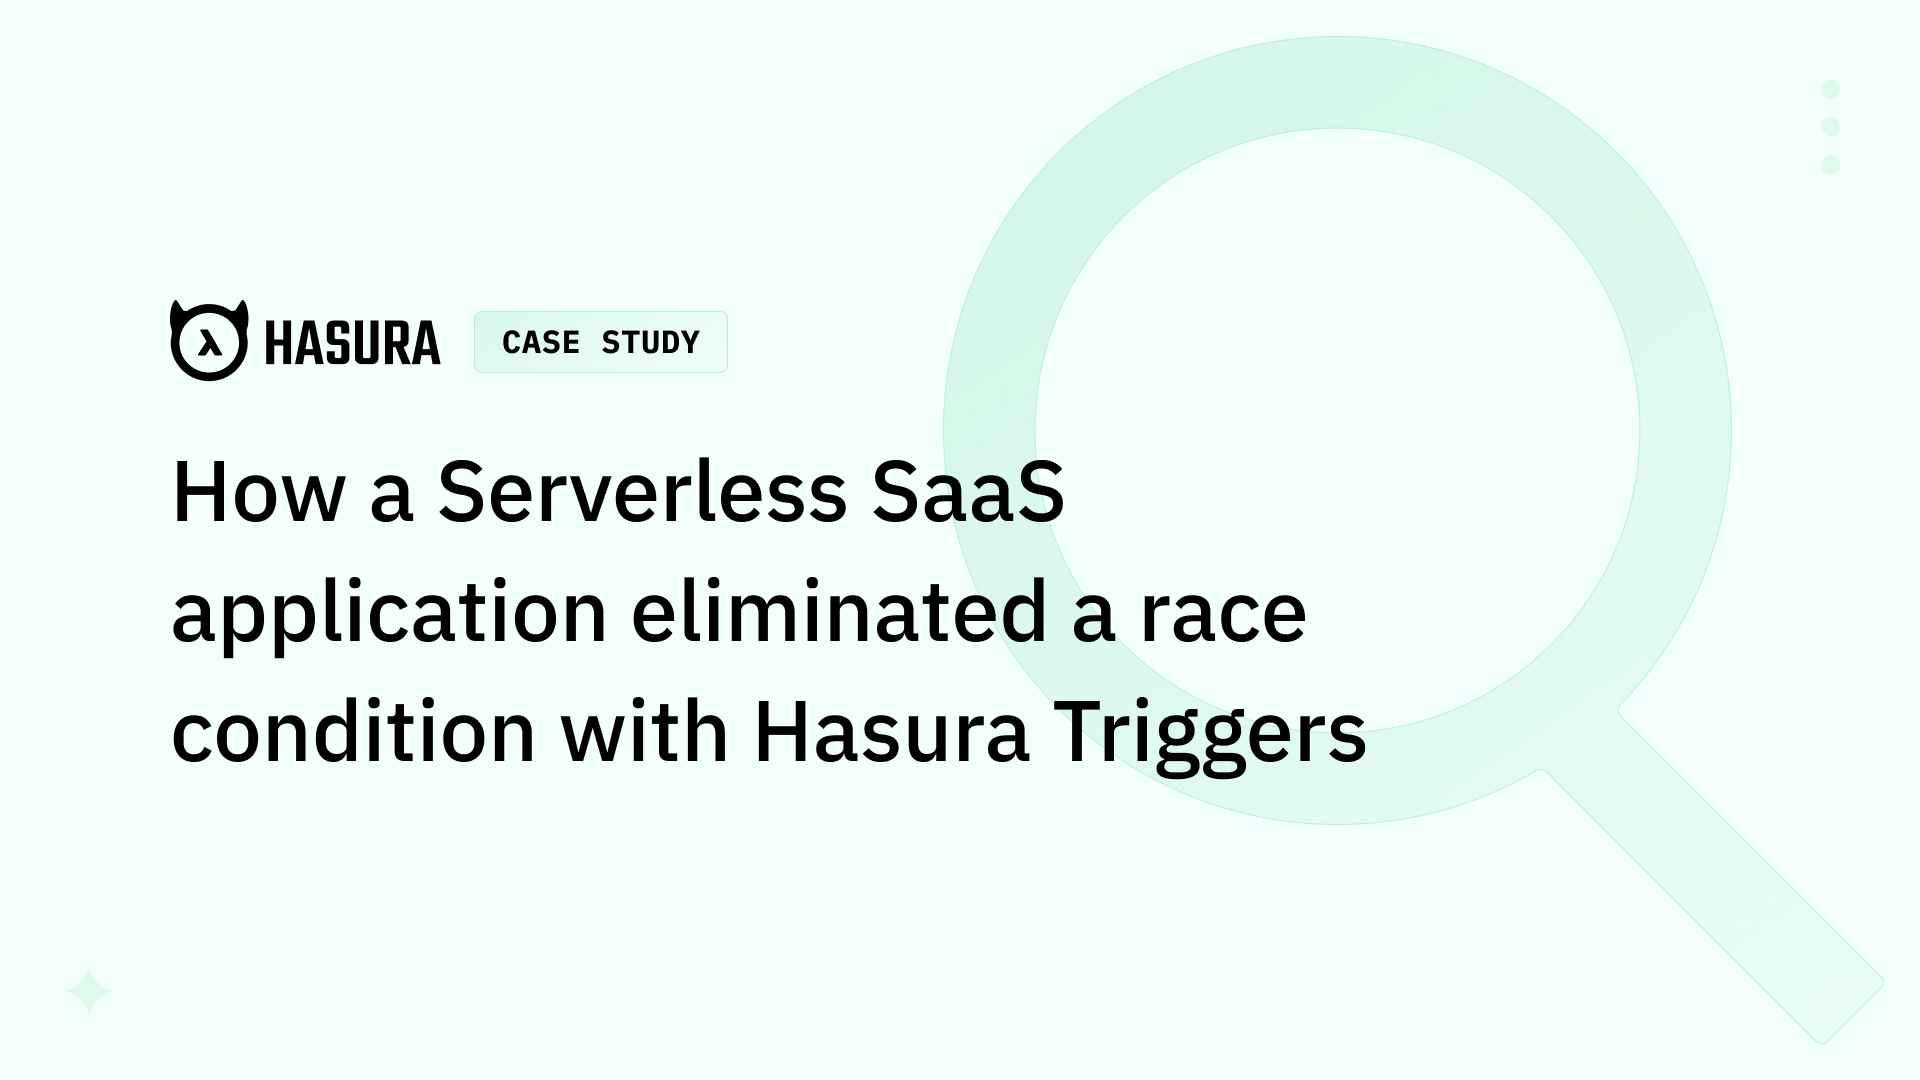 How a Serverless SaaS application eliminated a race condition with Hasura Triggers